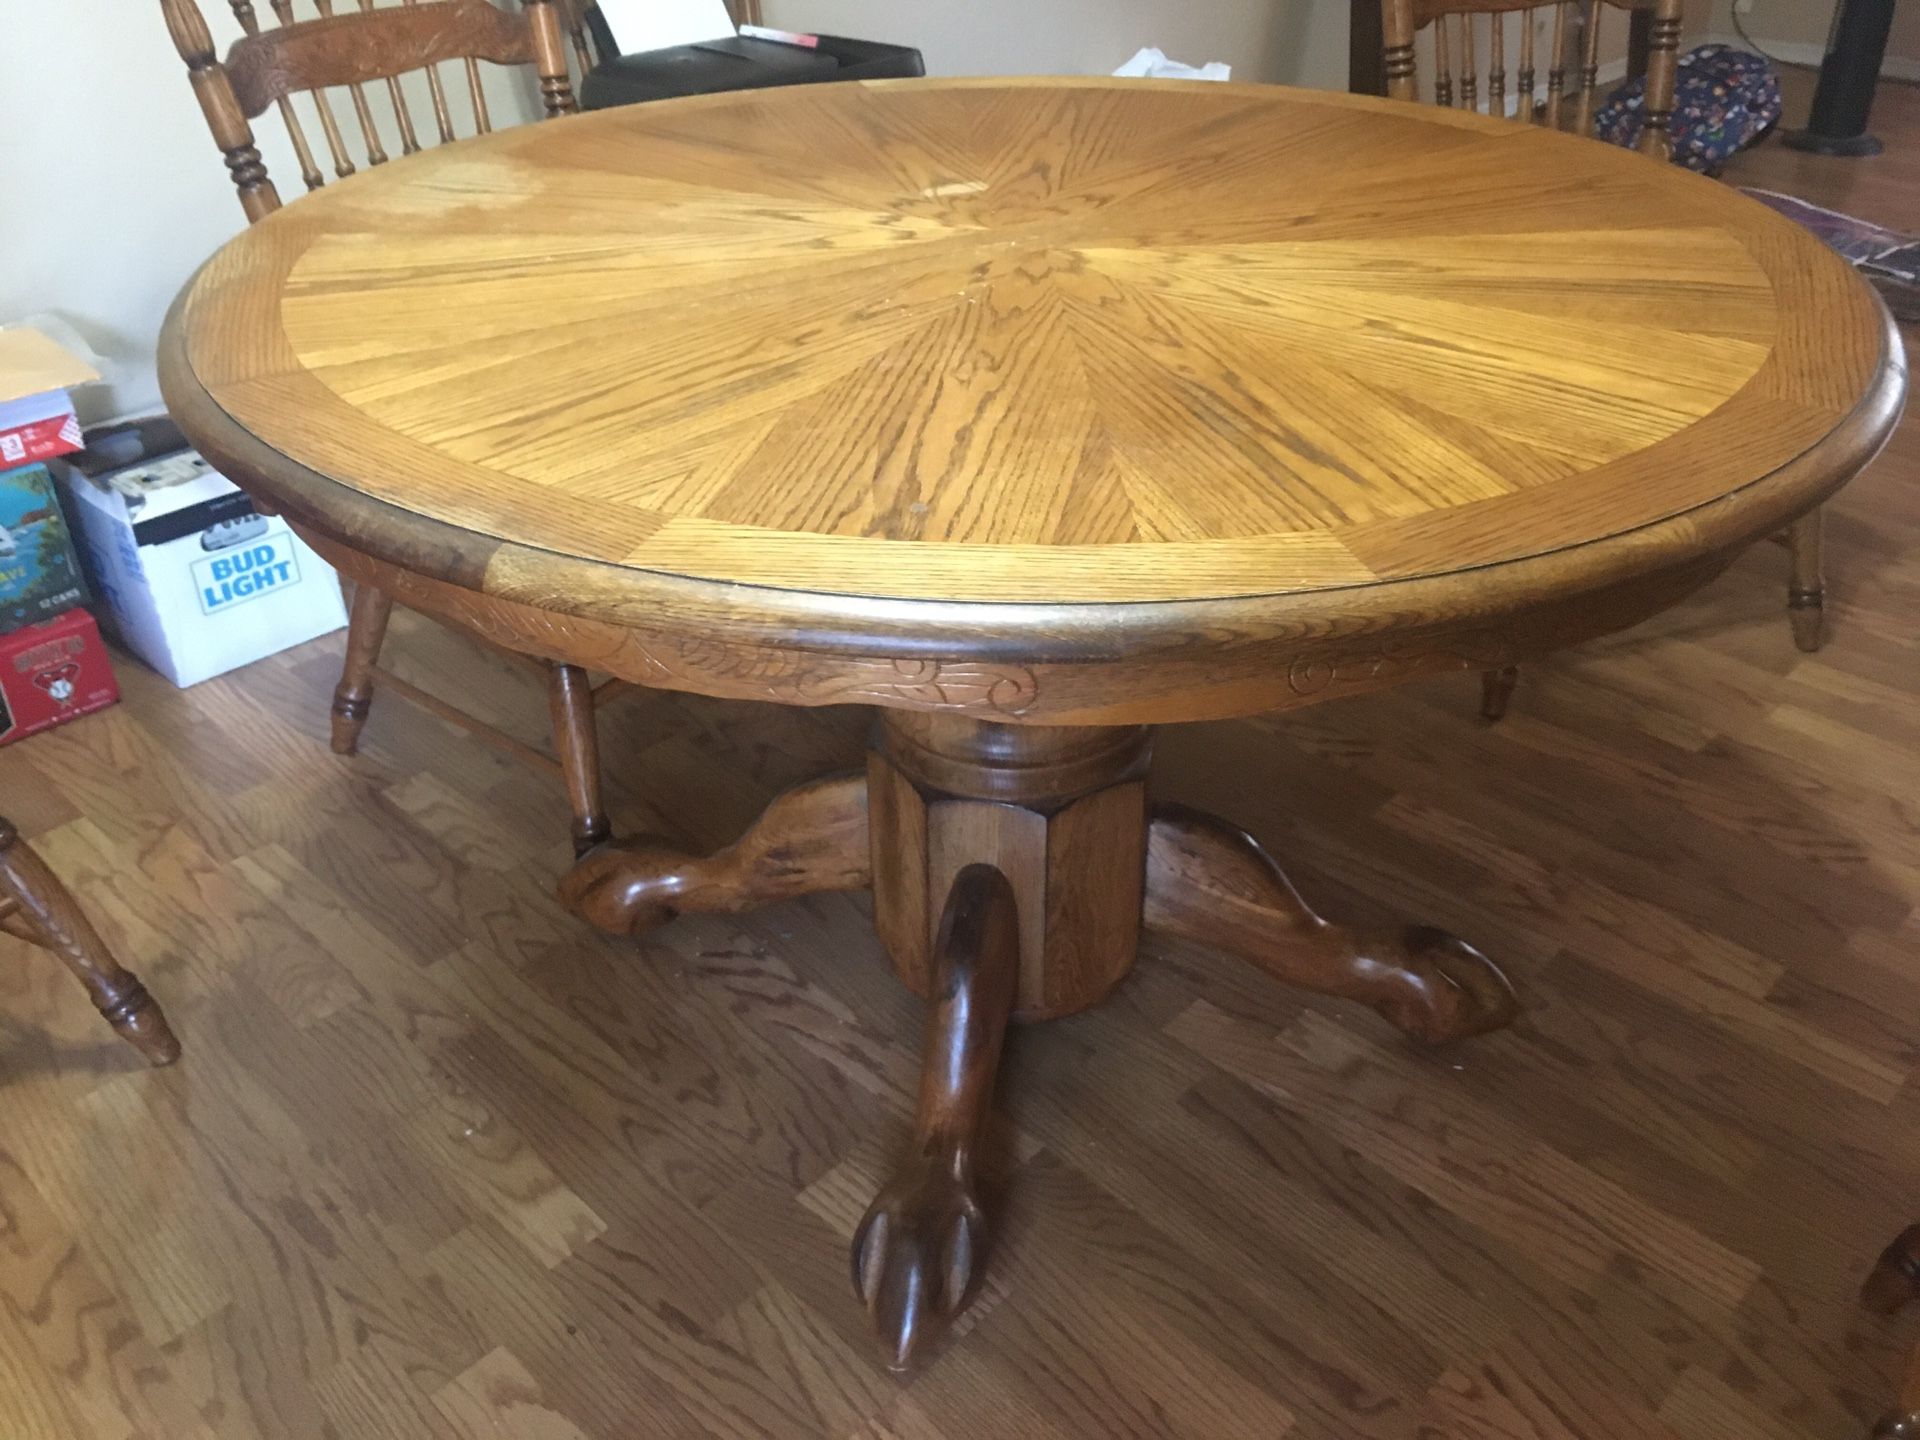 Wooden kitchen table with leaf and 6 chairs